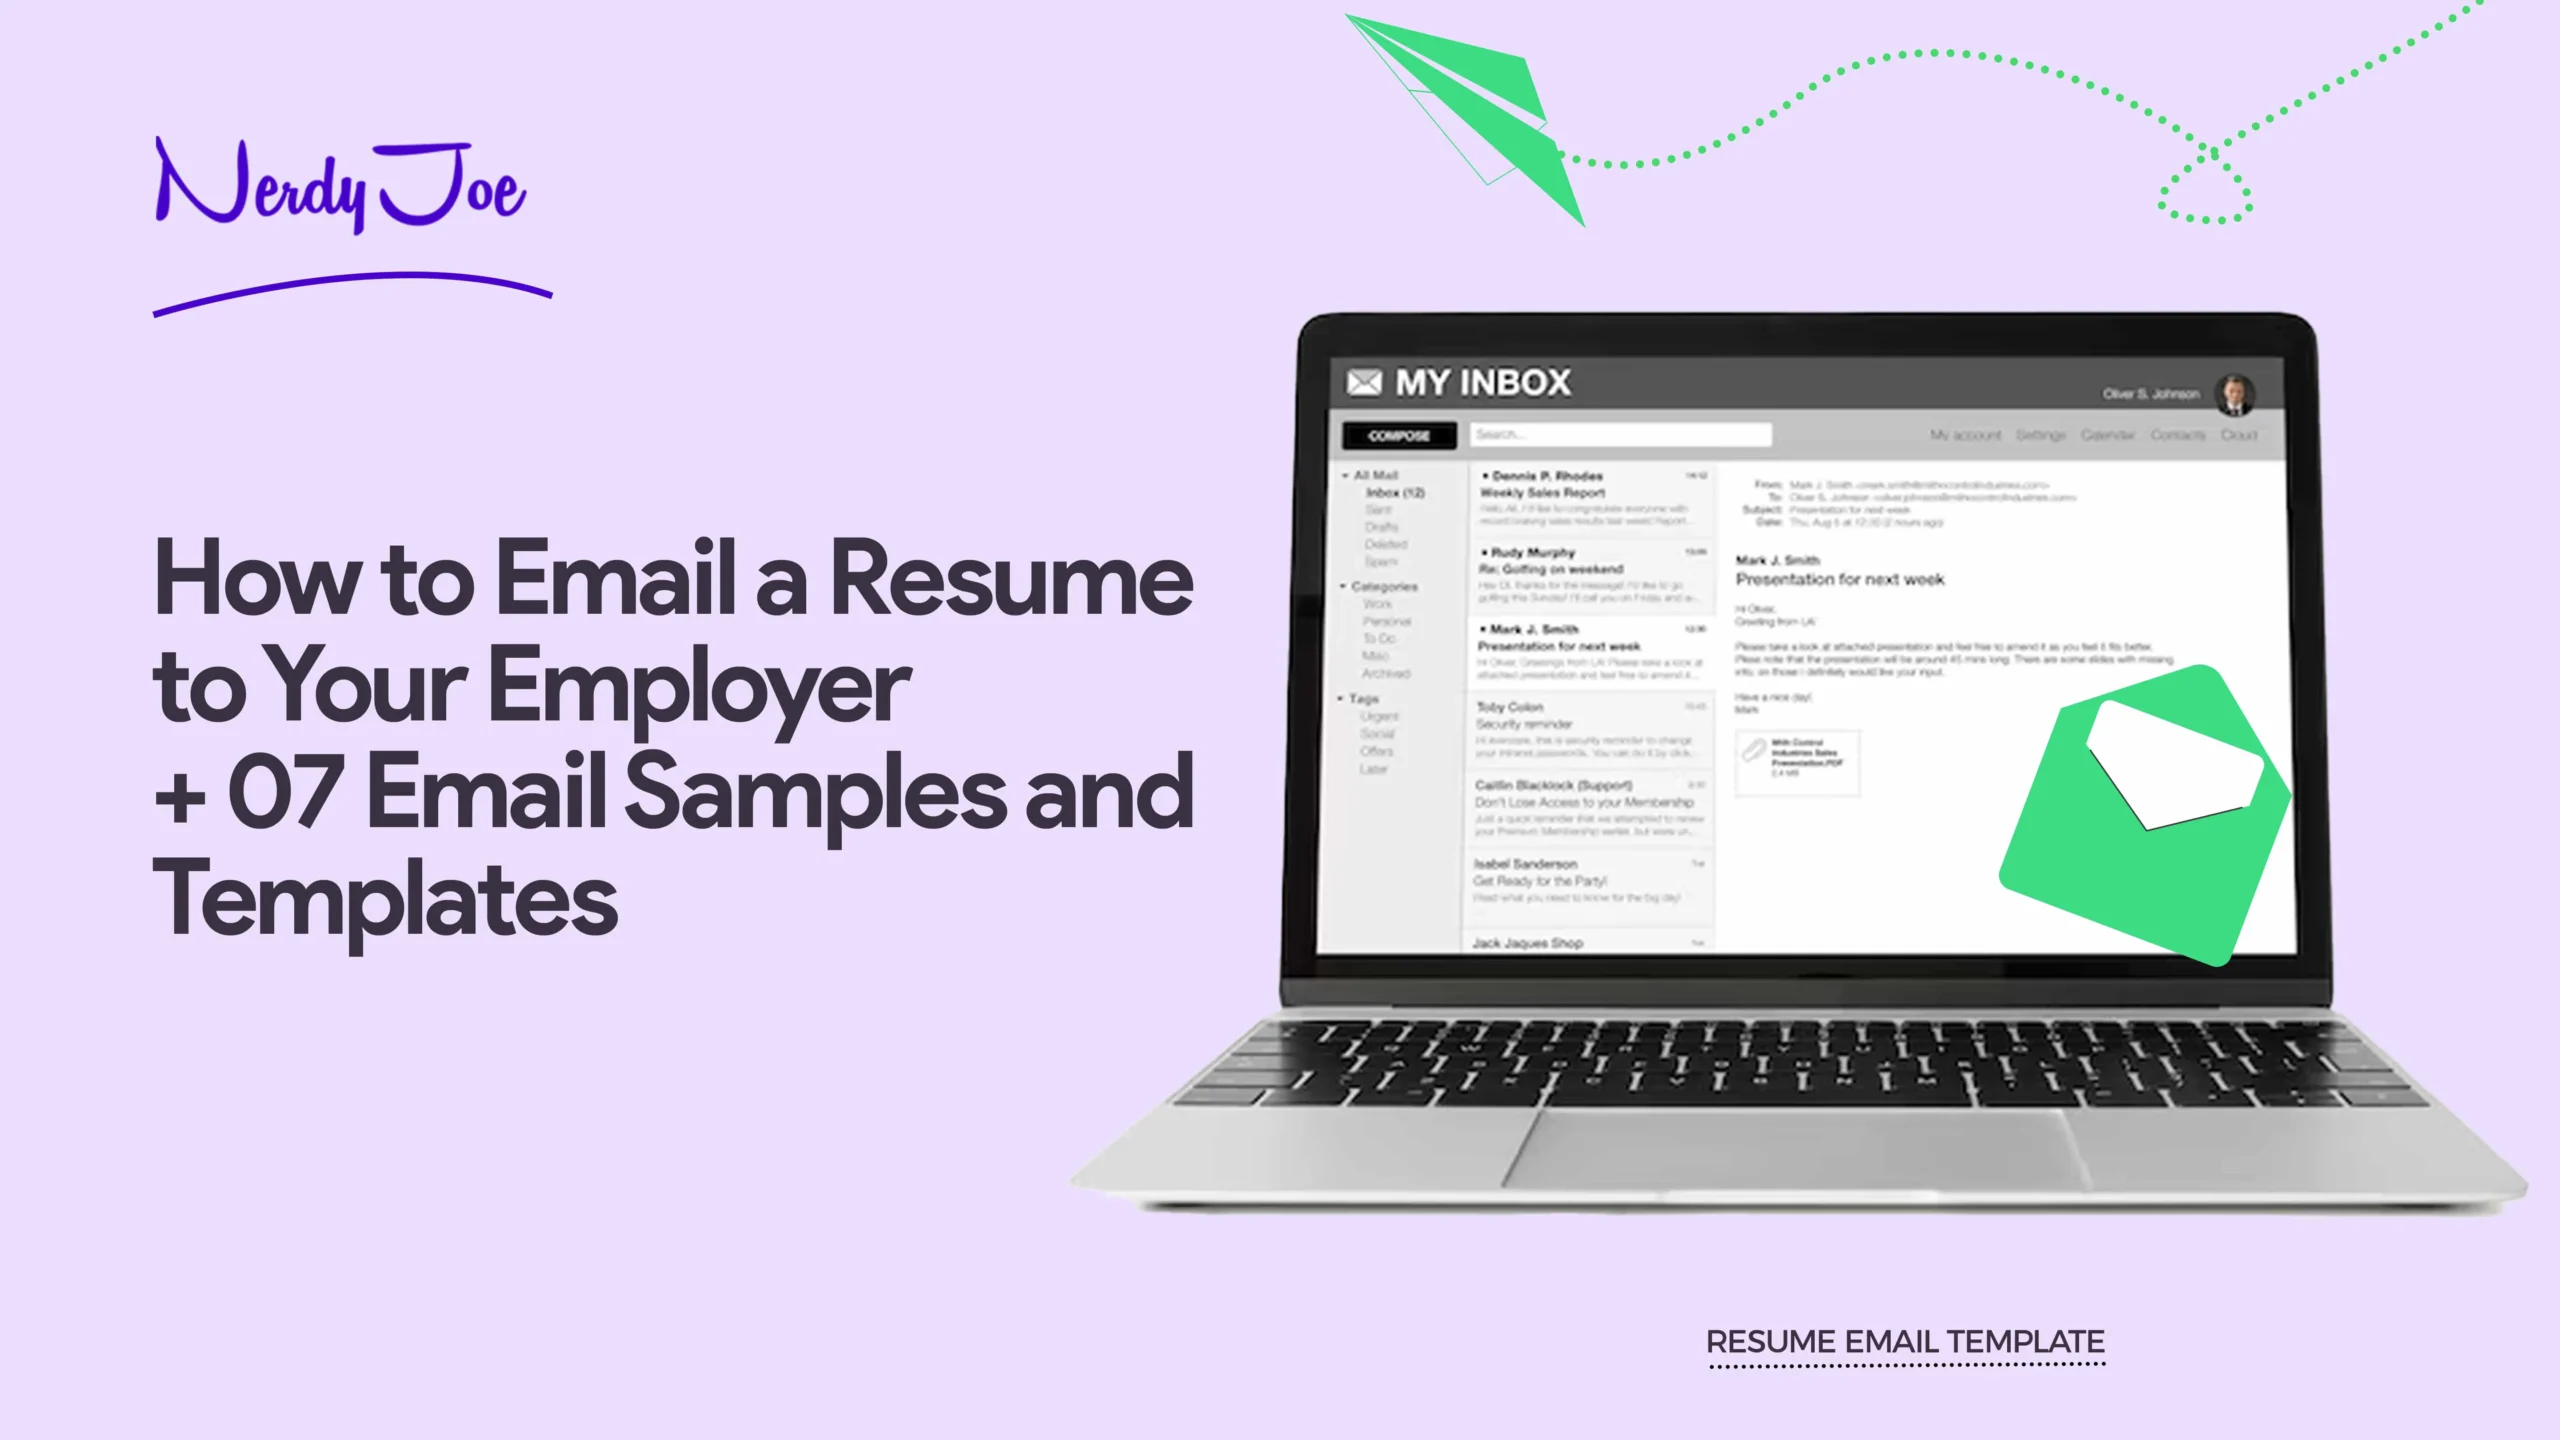 How to Email a Resume to Your Employer With 7 Templates